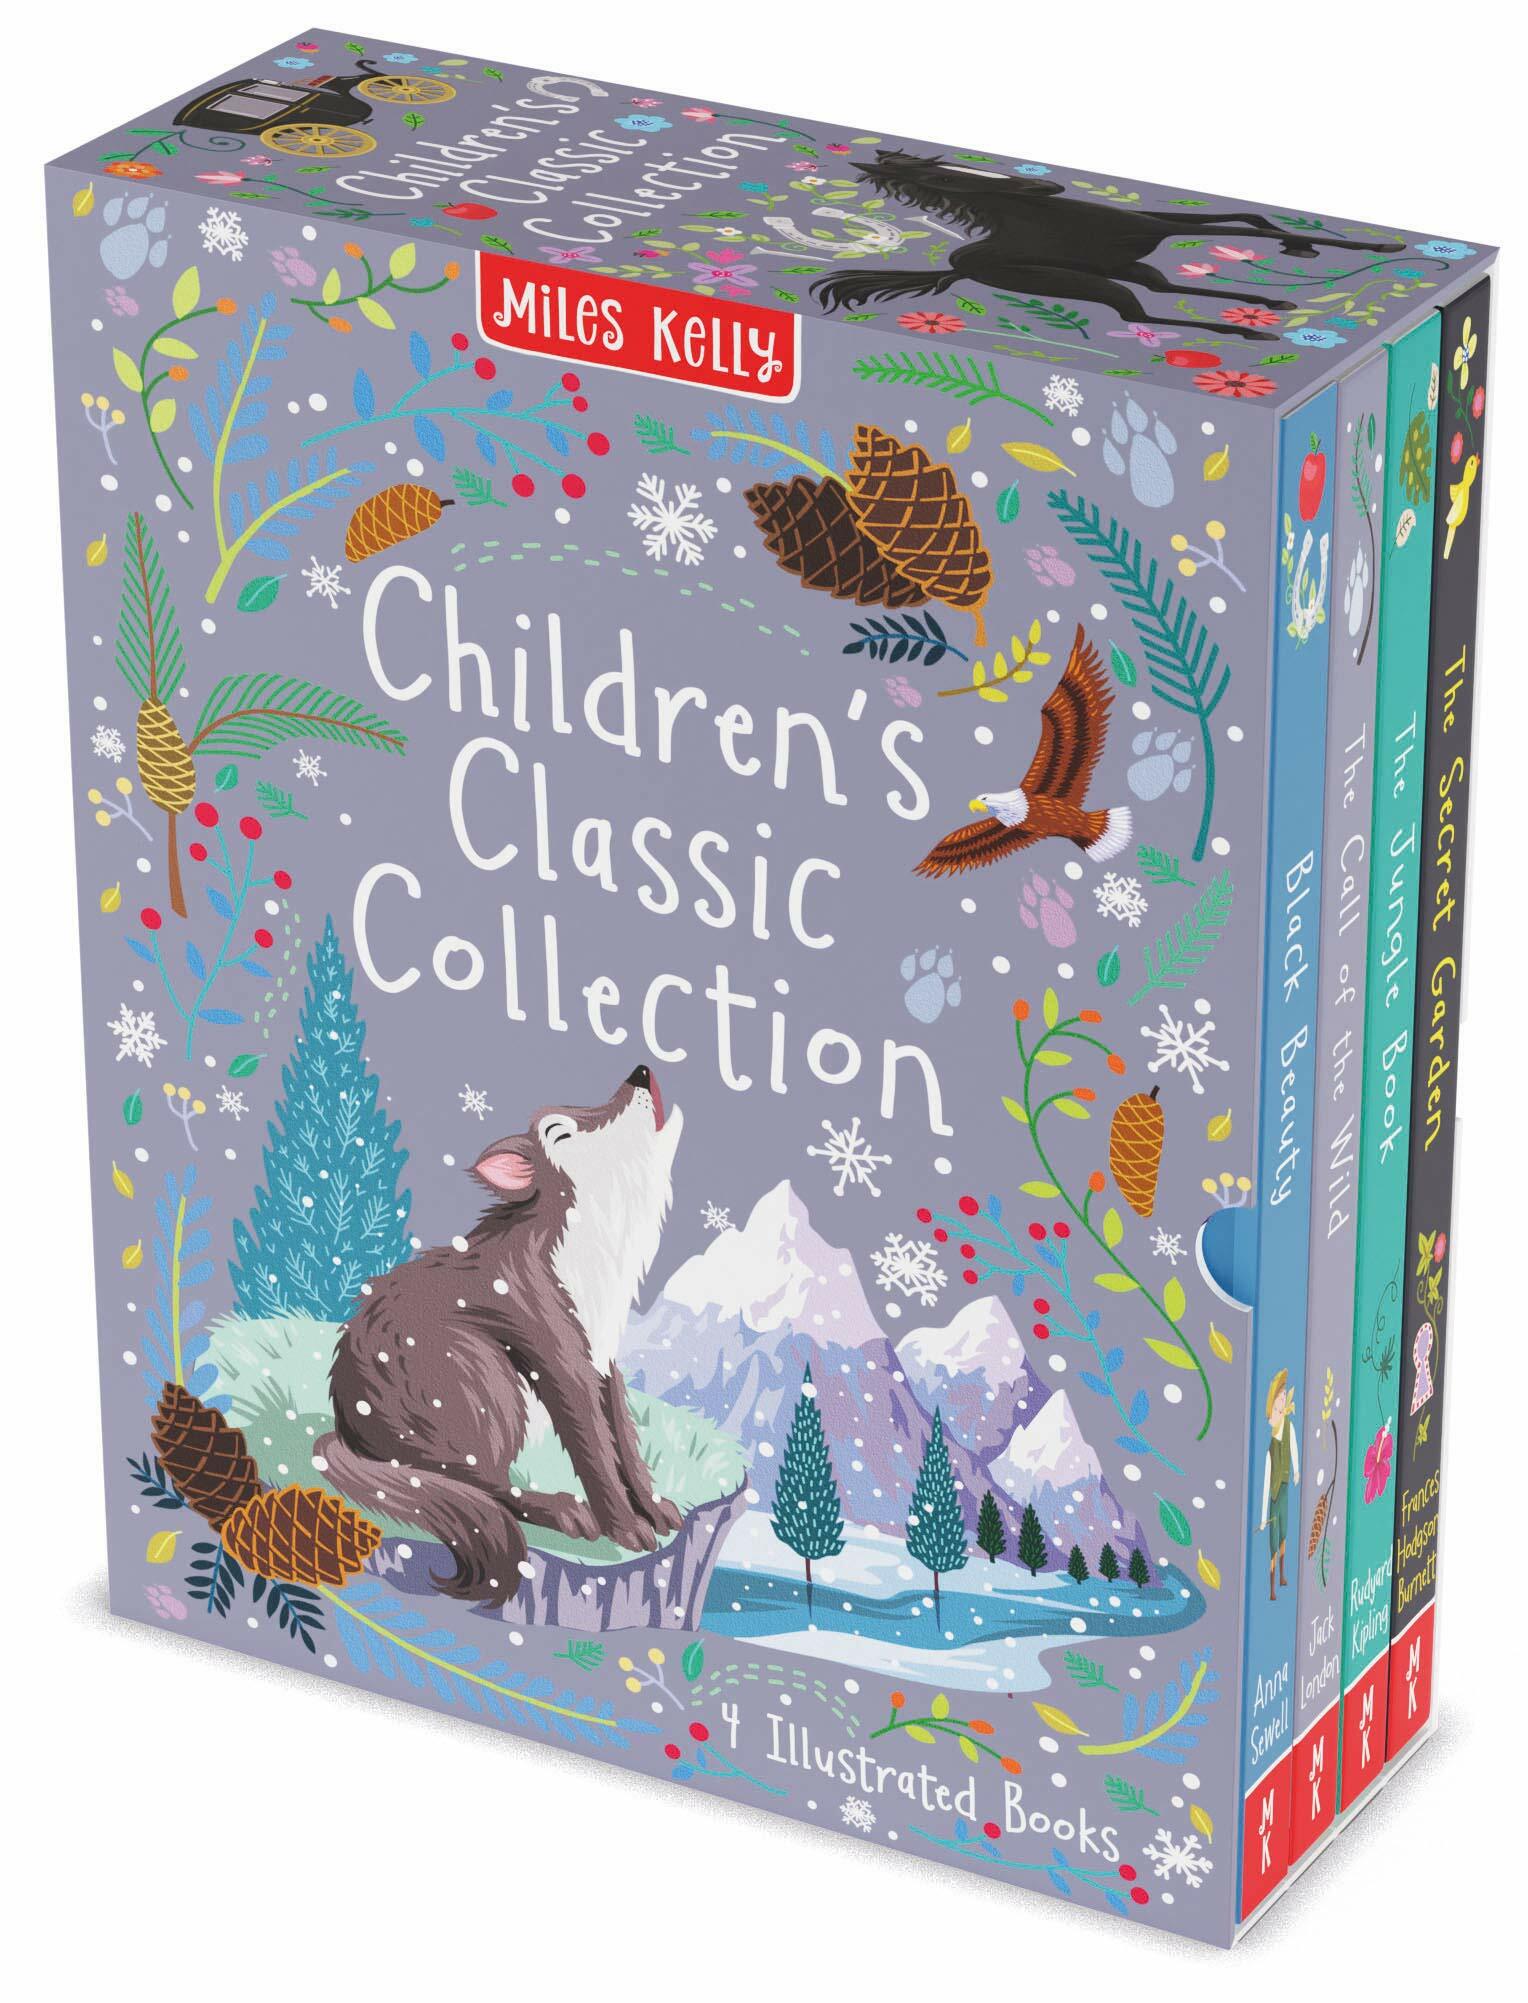 Childrens Classic Collection Slipcase (Hardcover 4권)